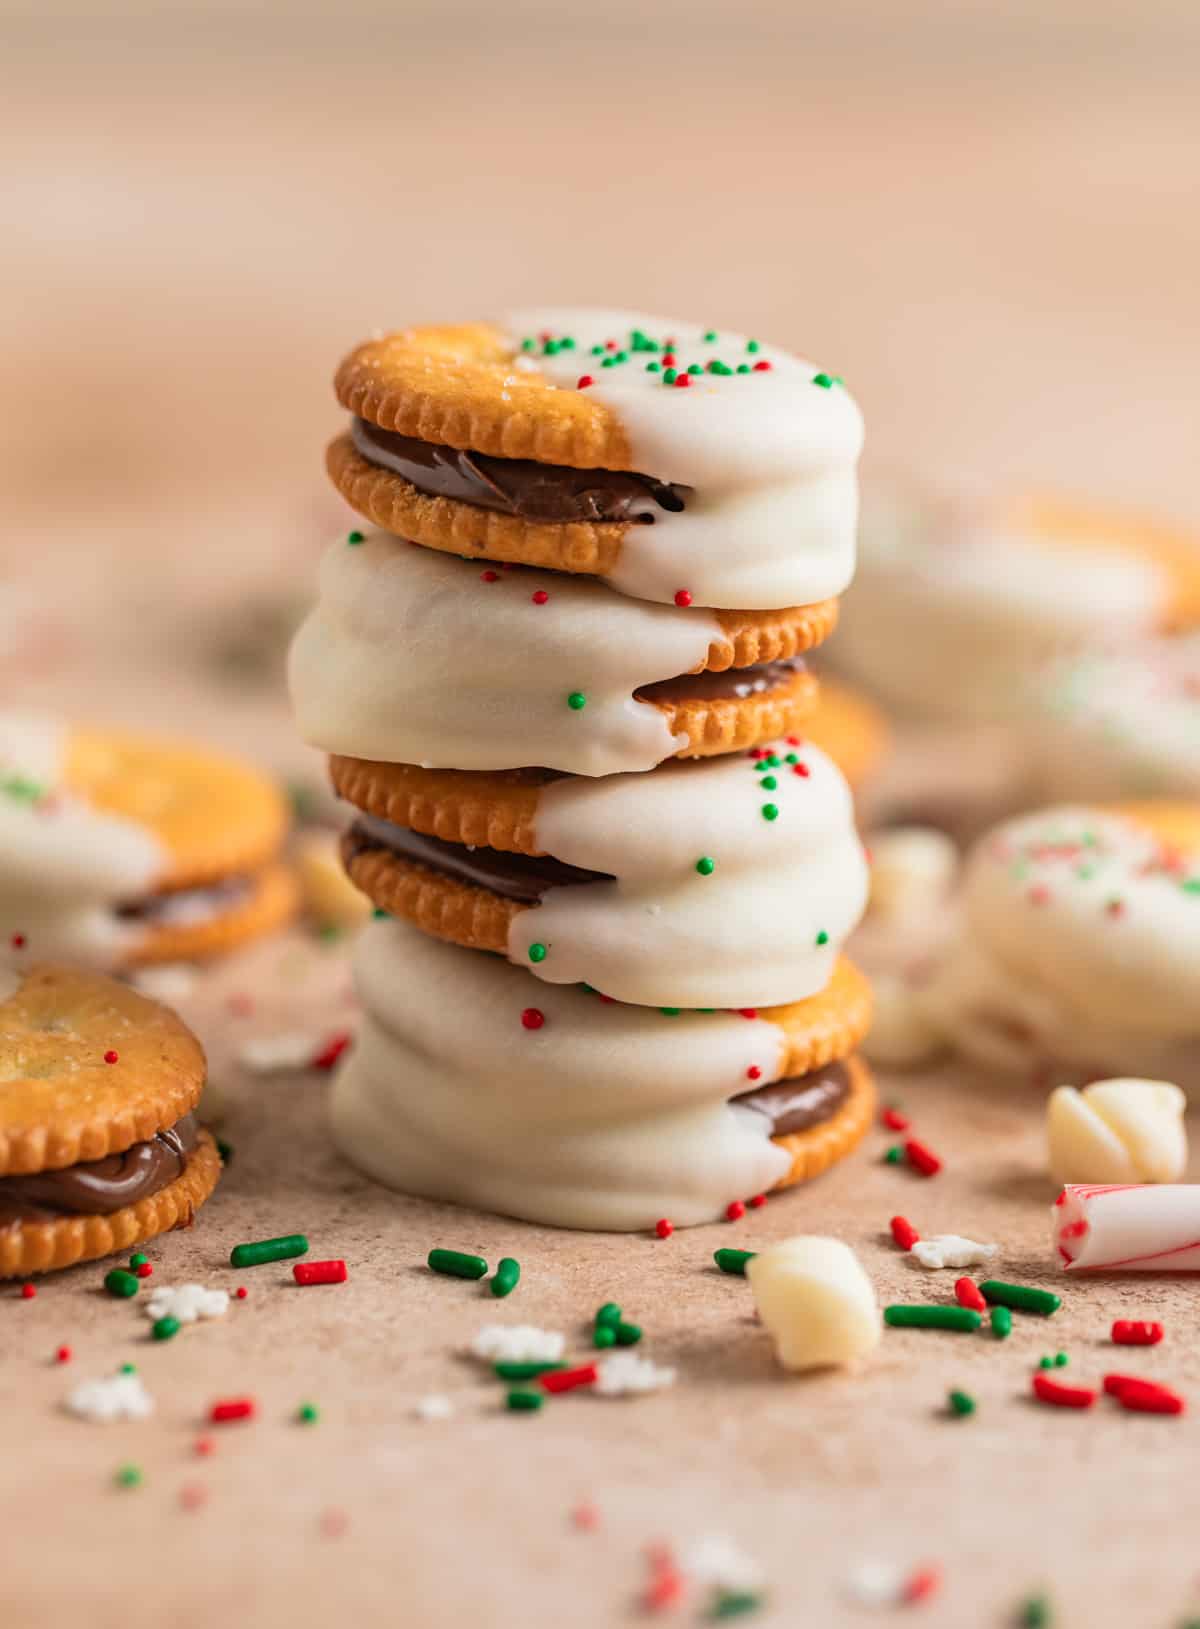 Stack of Christmas no bake Ritz cracker sandwich cookies with Nutella and white chocolate.